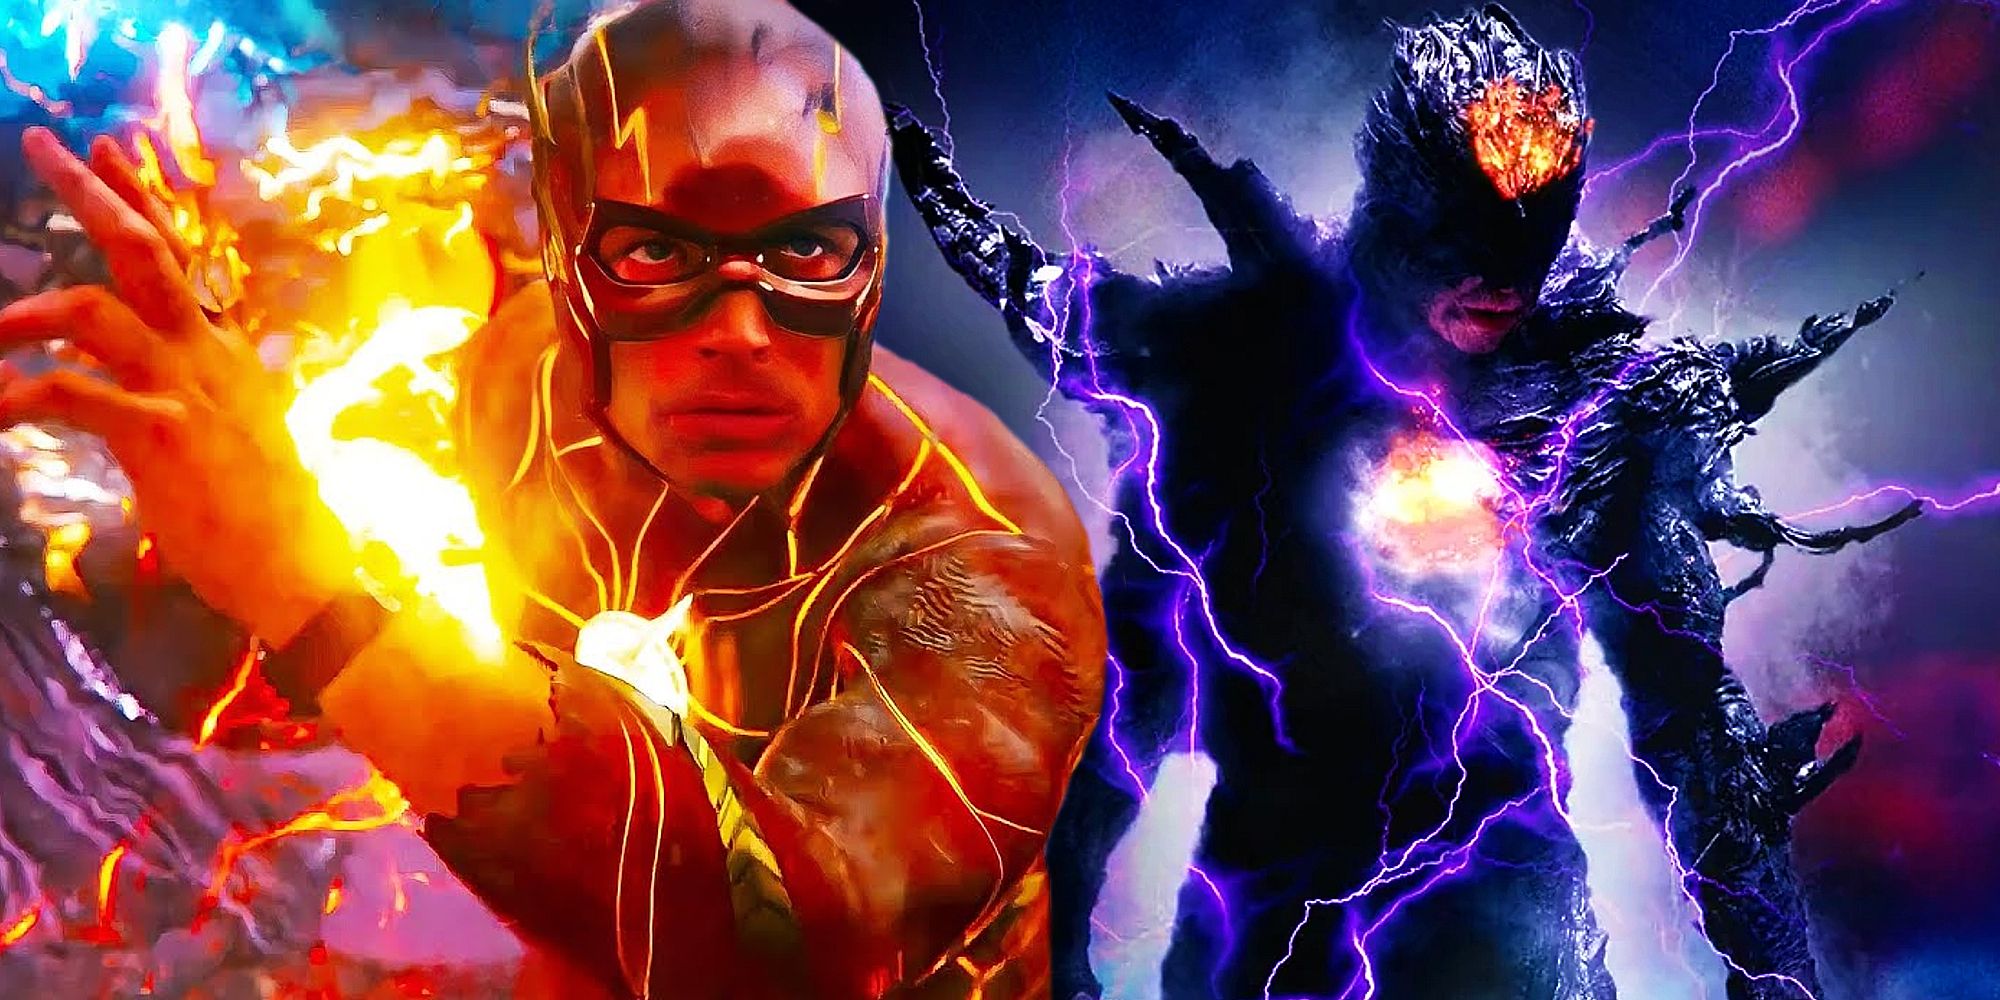 Barry in the Speed Force in The Flash movie next to Dark Flash